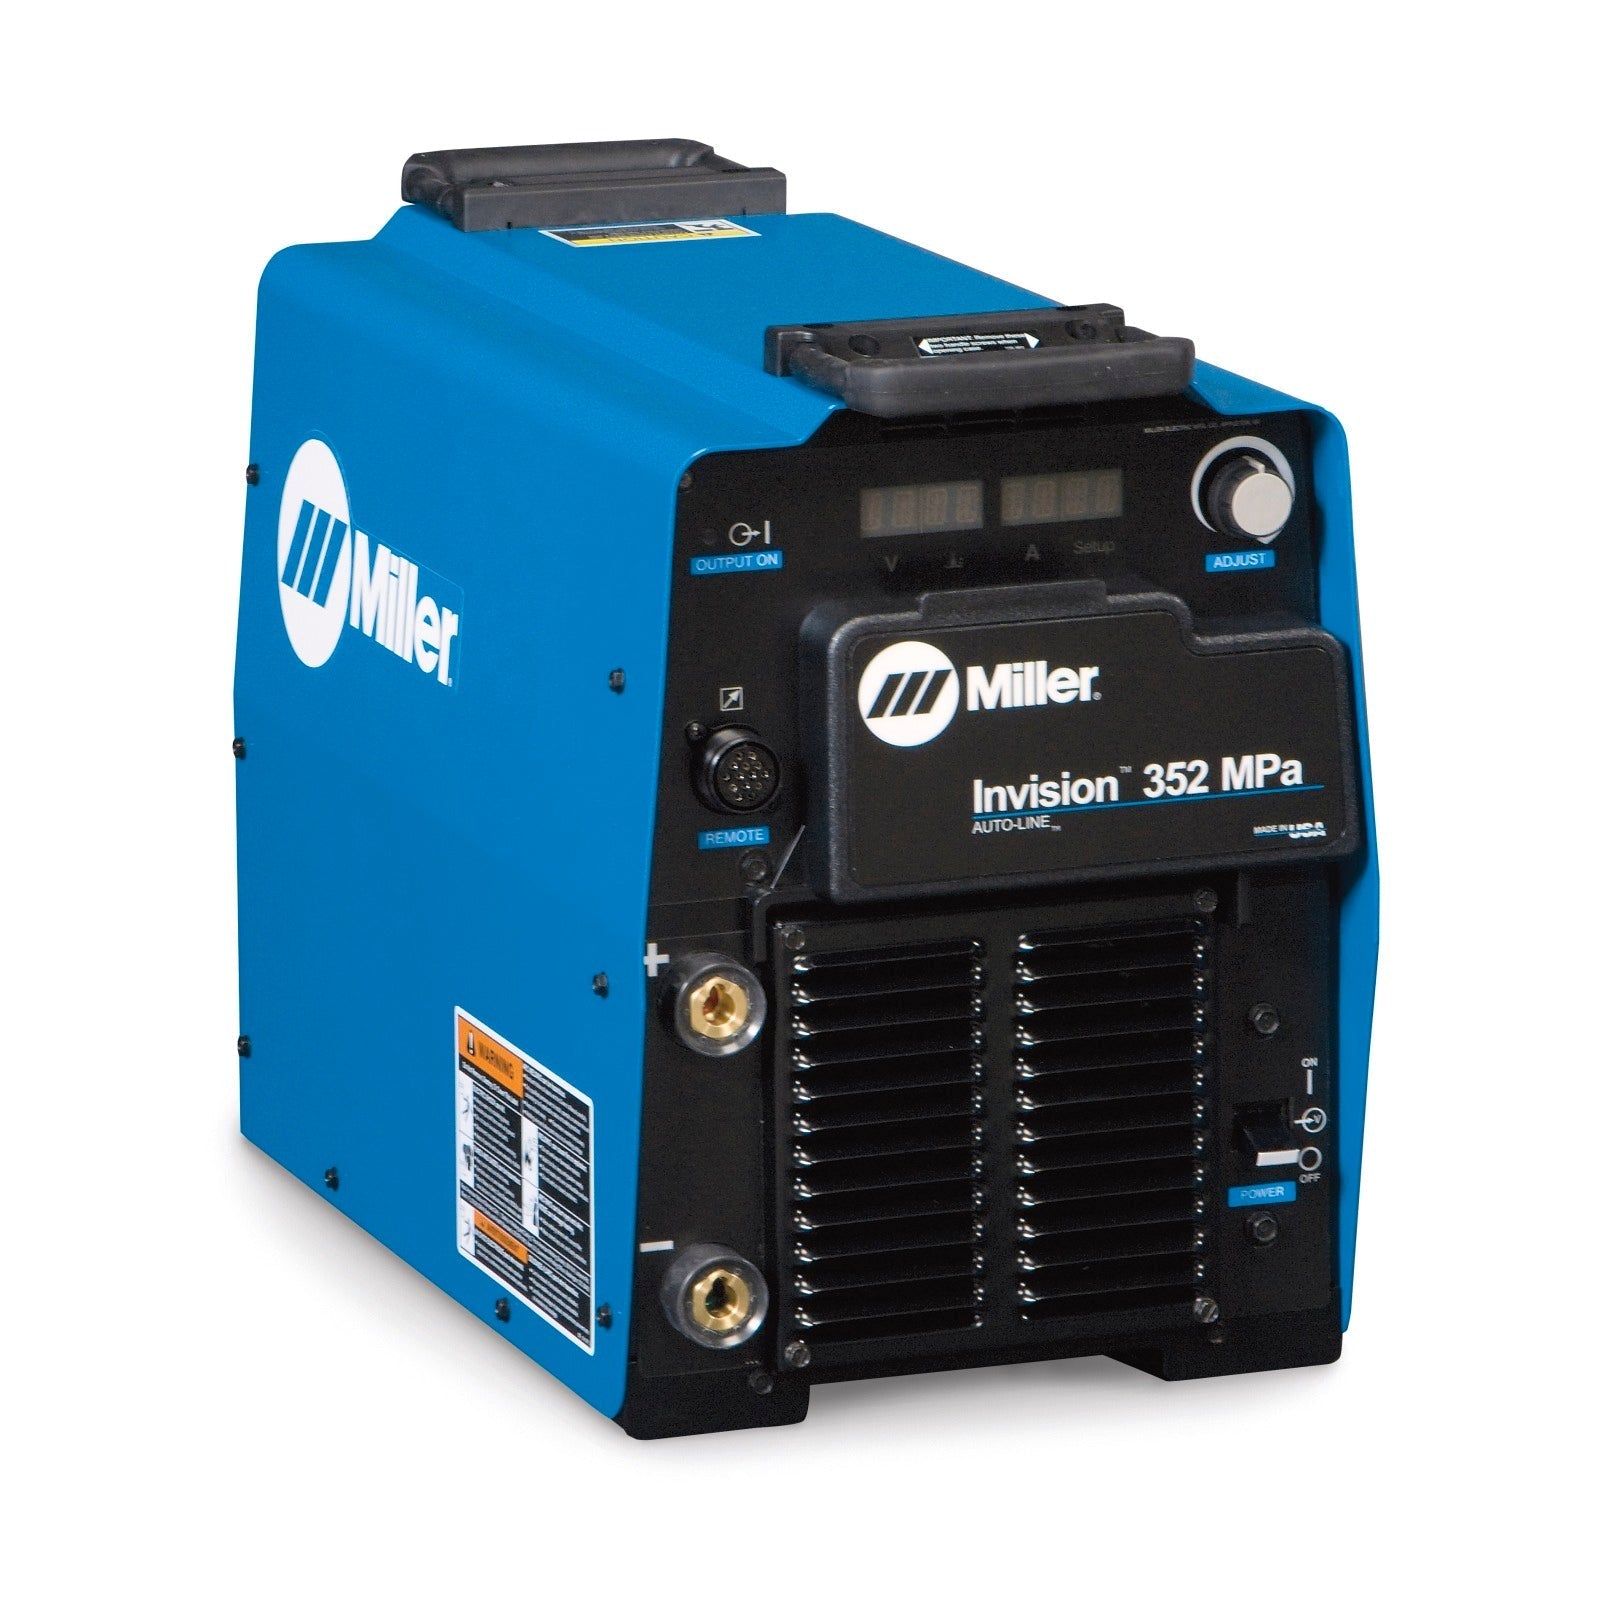 Miller Invision 352 MPa MIG Welder with Aux Power (907431001)